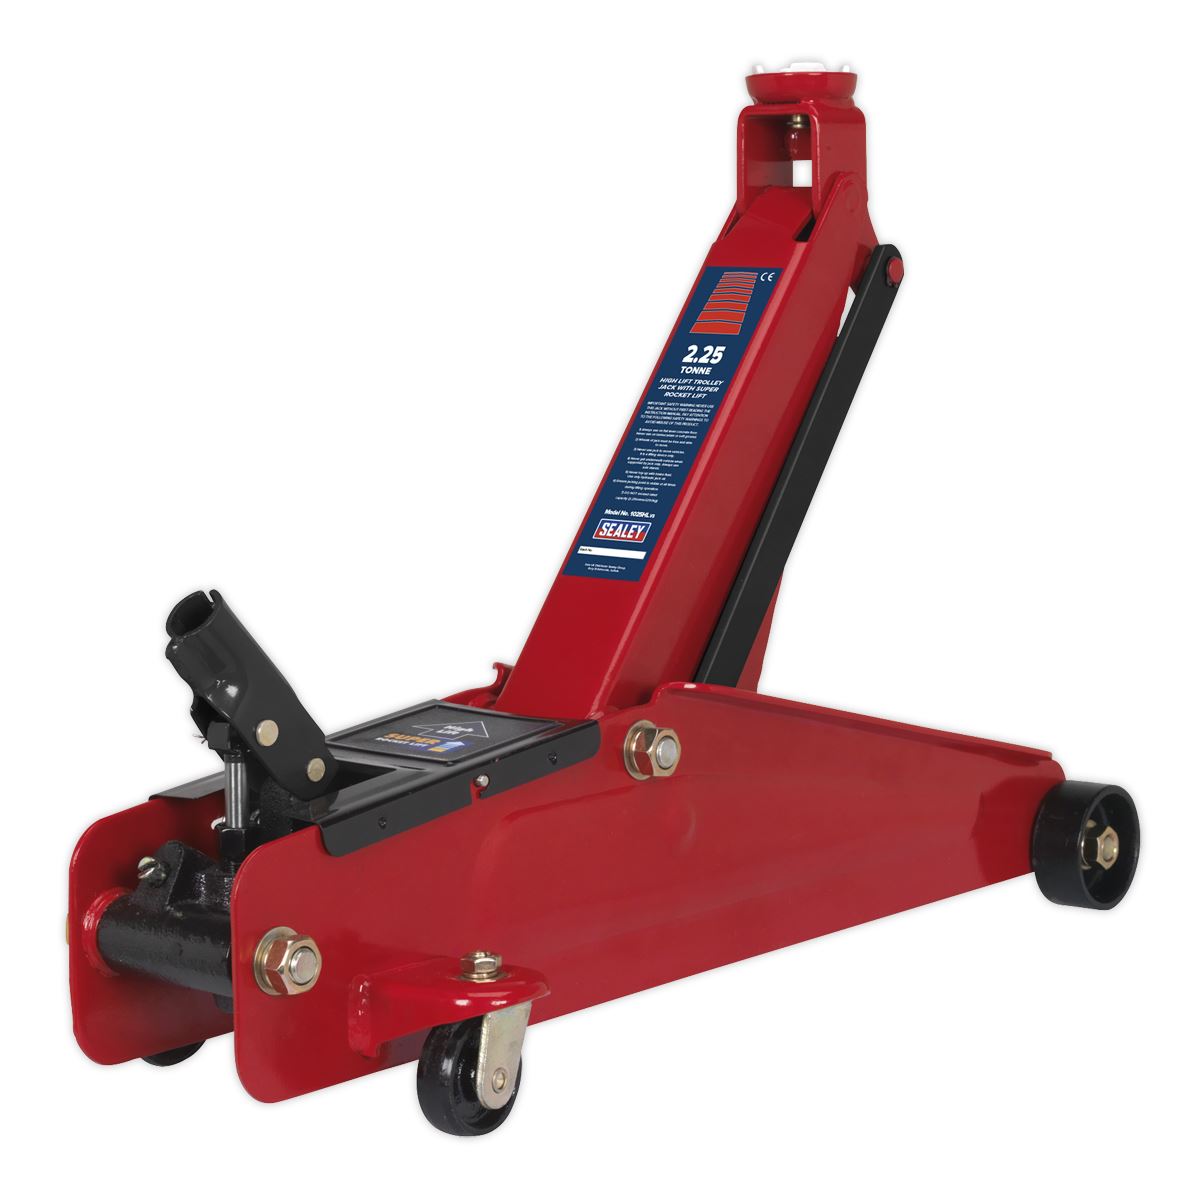 Sealey High Lift SUV Trolley Jack with Super Rocket Lift 2.25 Tonne